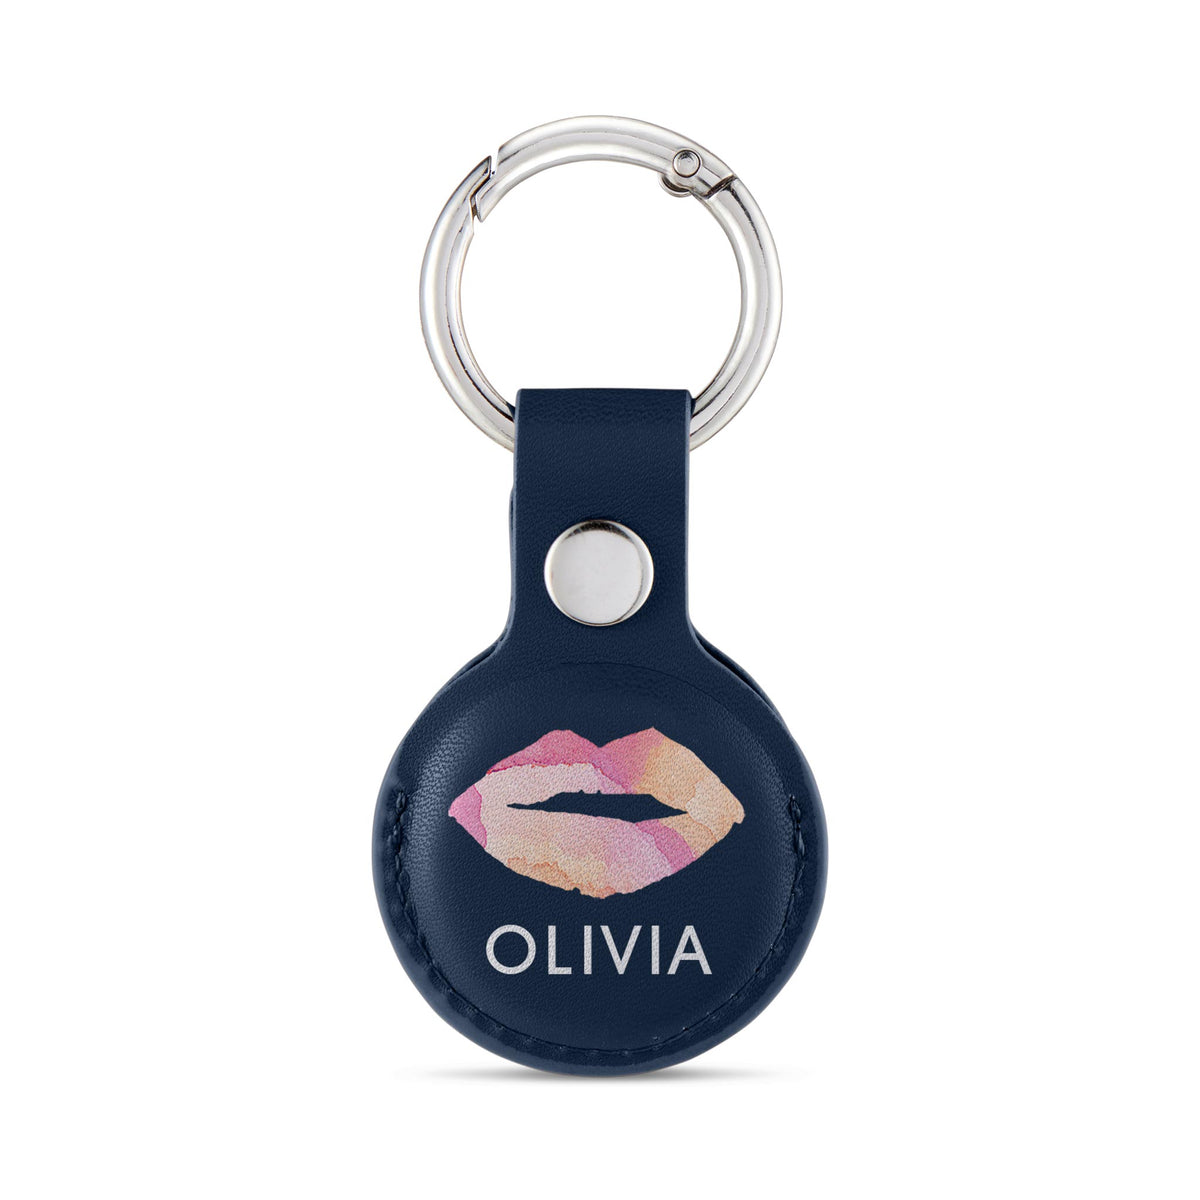 Personalised AirTag Case Keyring Holder Keychain Holder for Air Tag Tracking Device Lips KIss Name on Blue